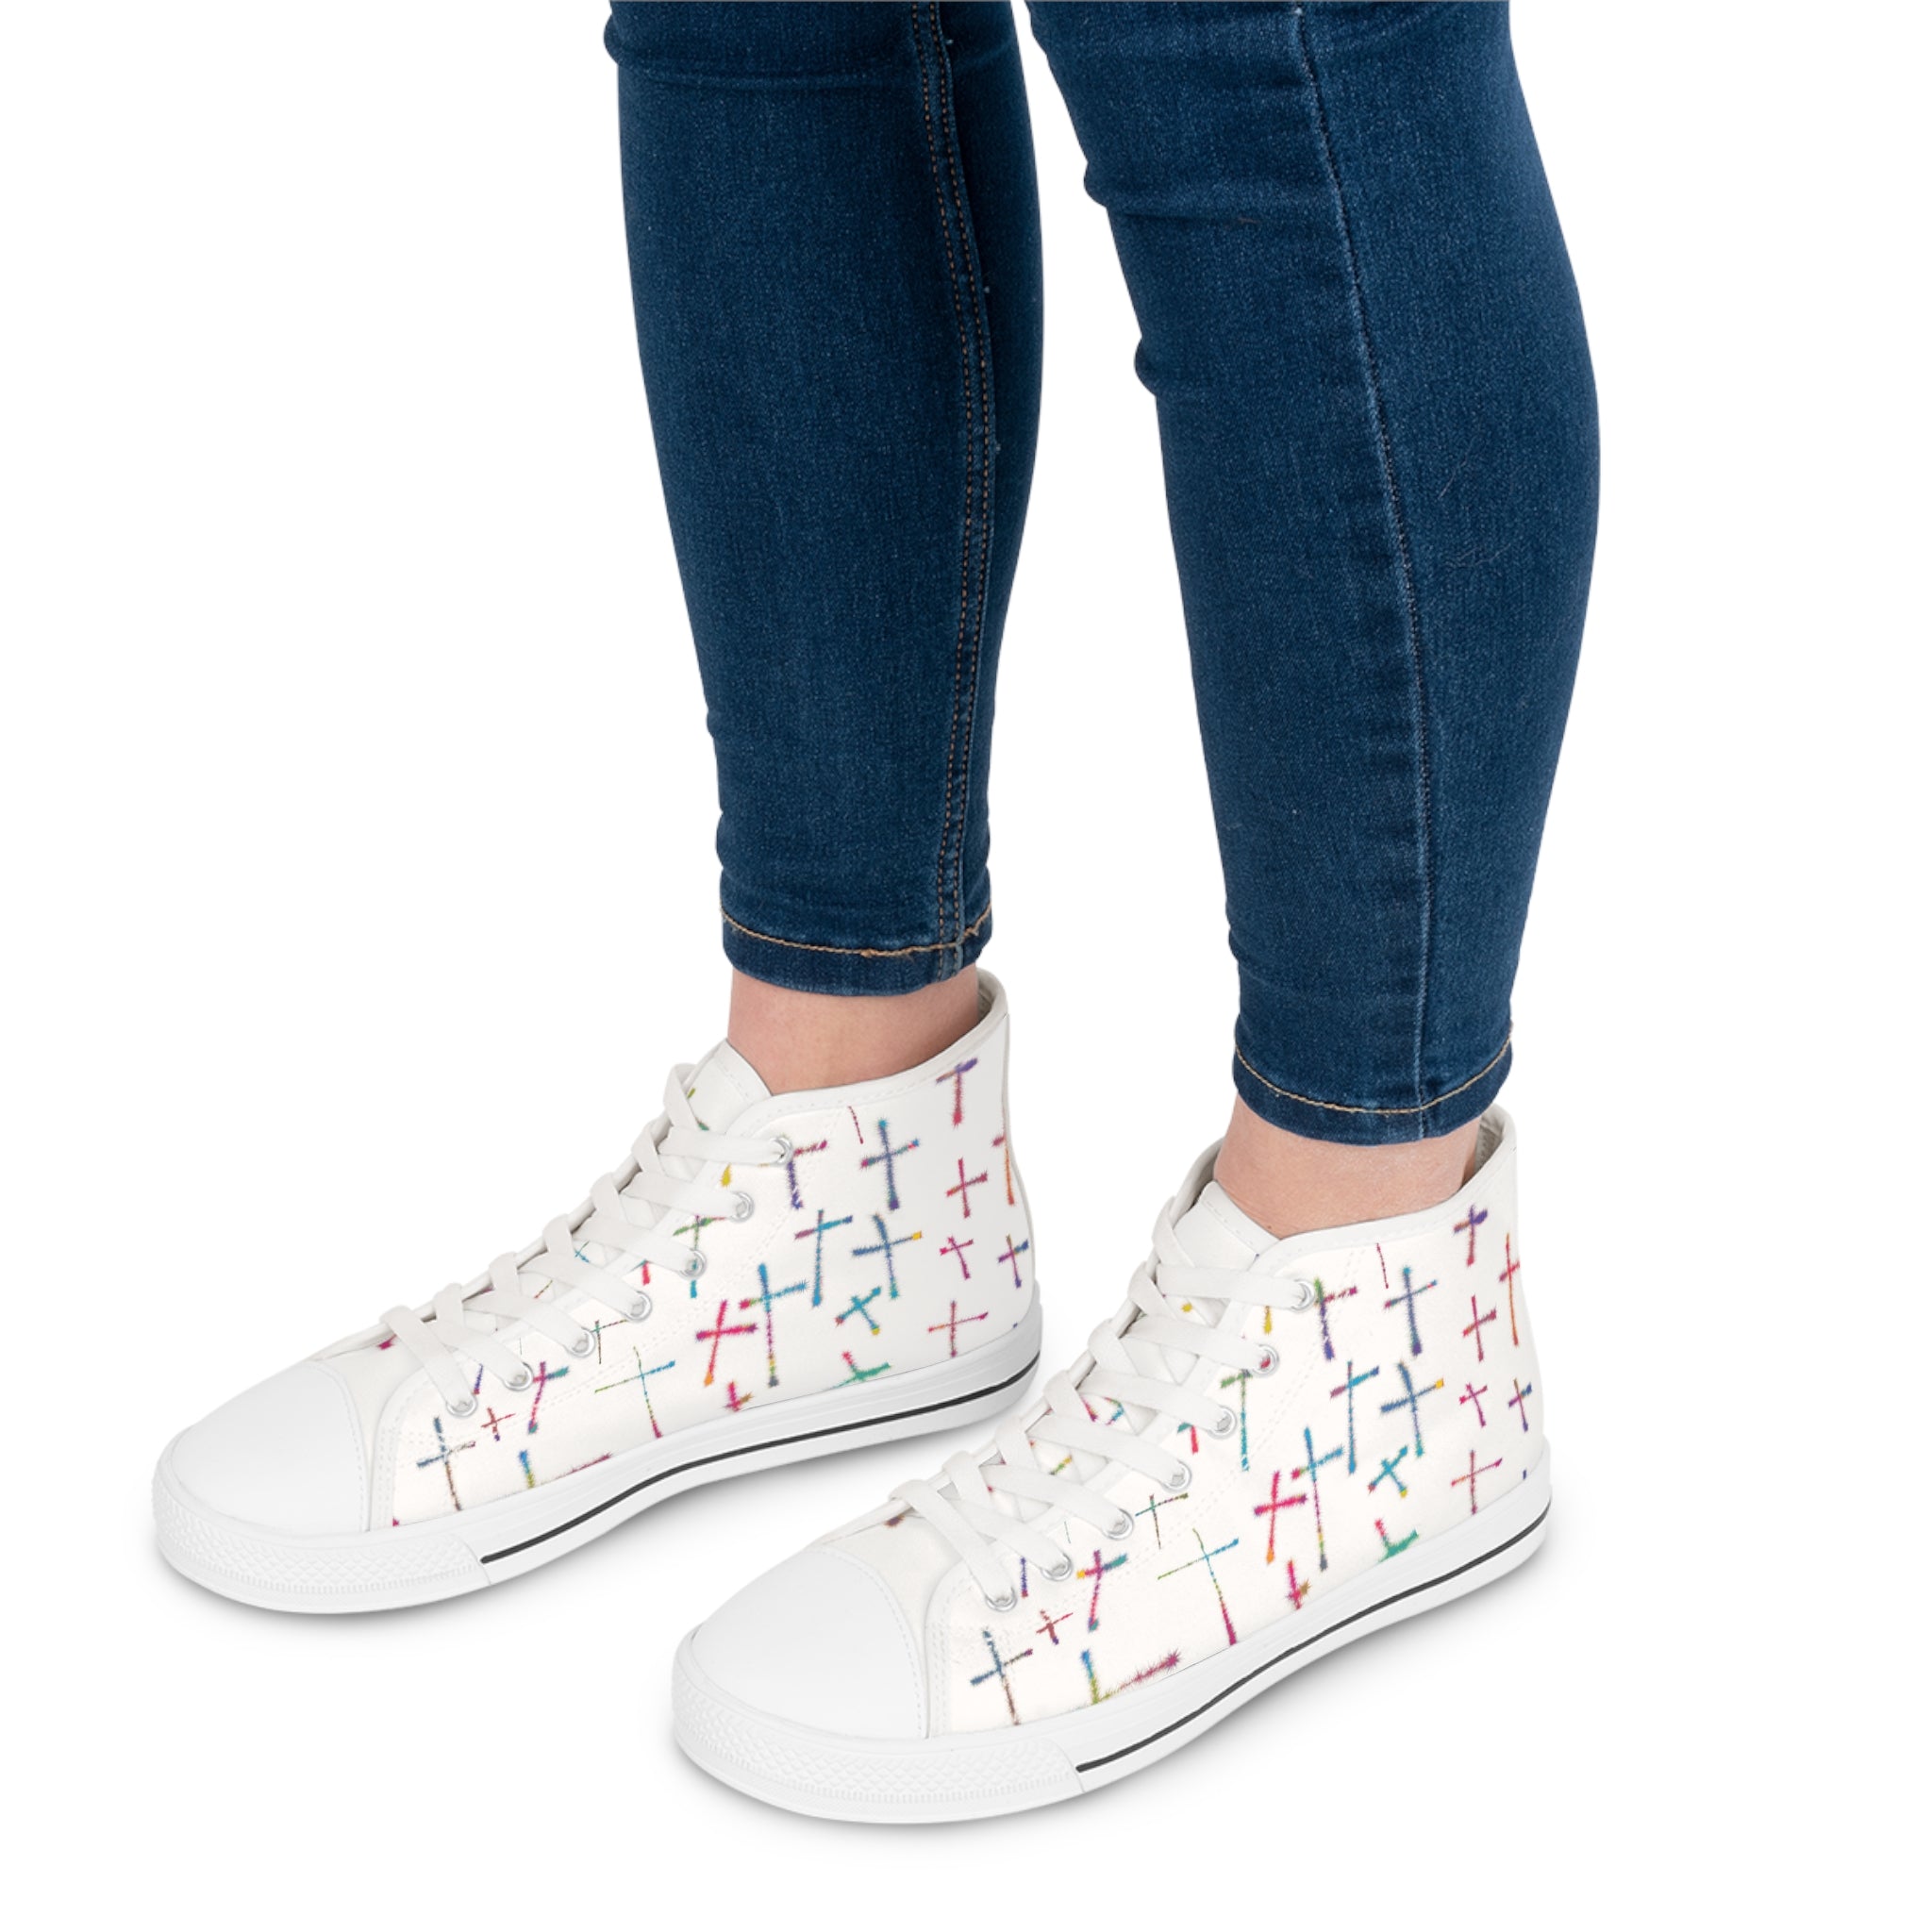 Colorful Crosses Women's High Top Sneakers Size: US 5.5 Color: White sole Jesus Passion Apparel